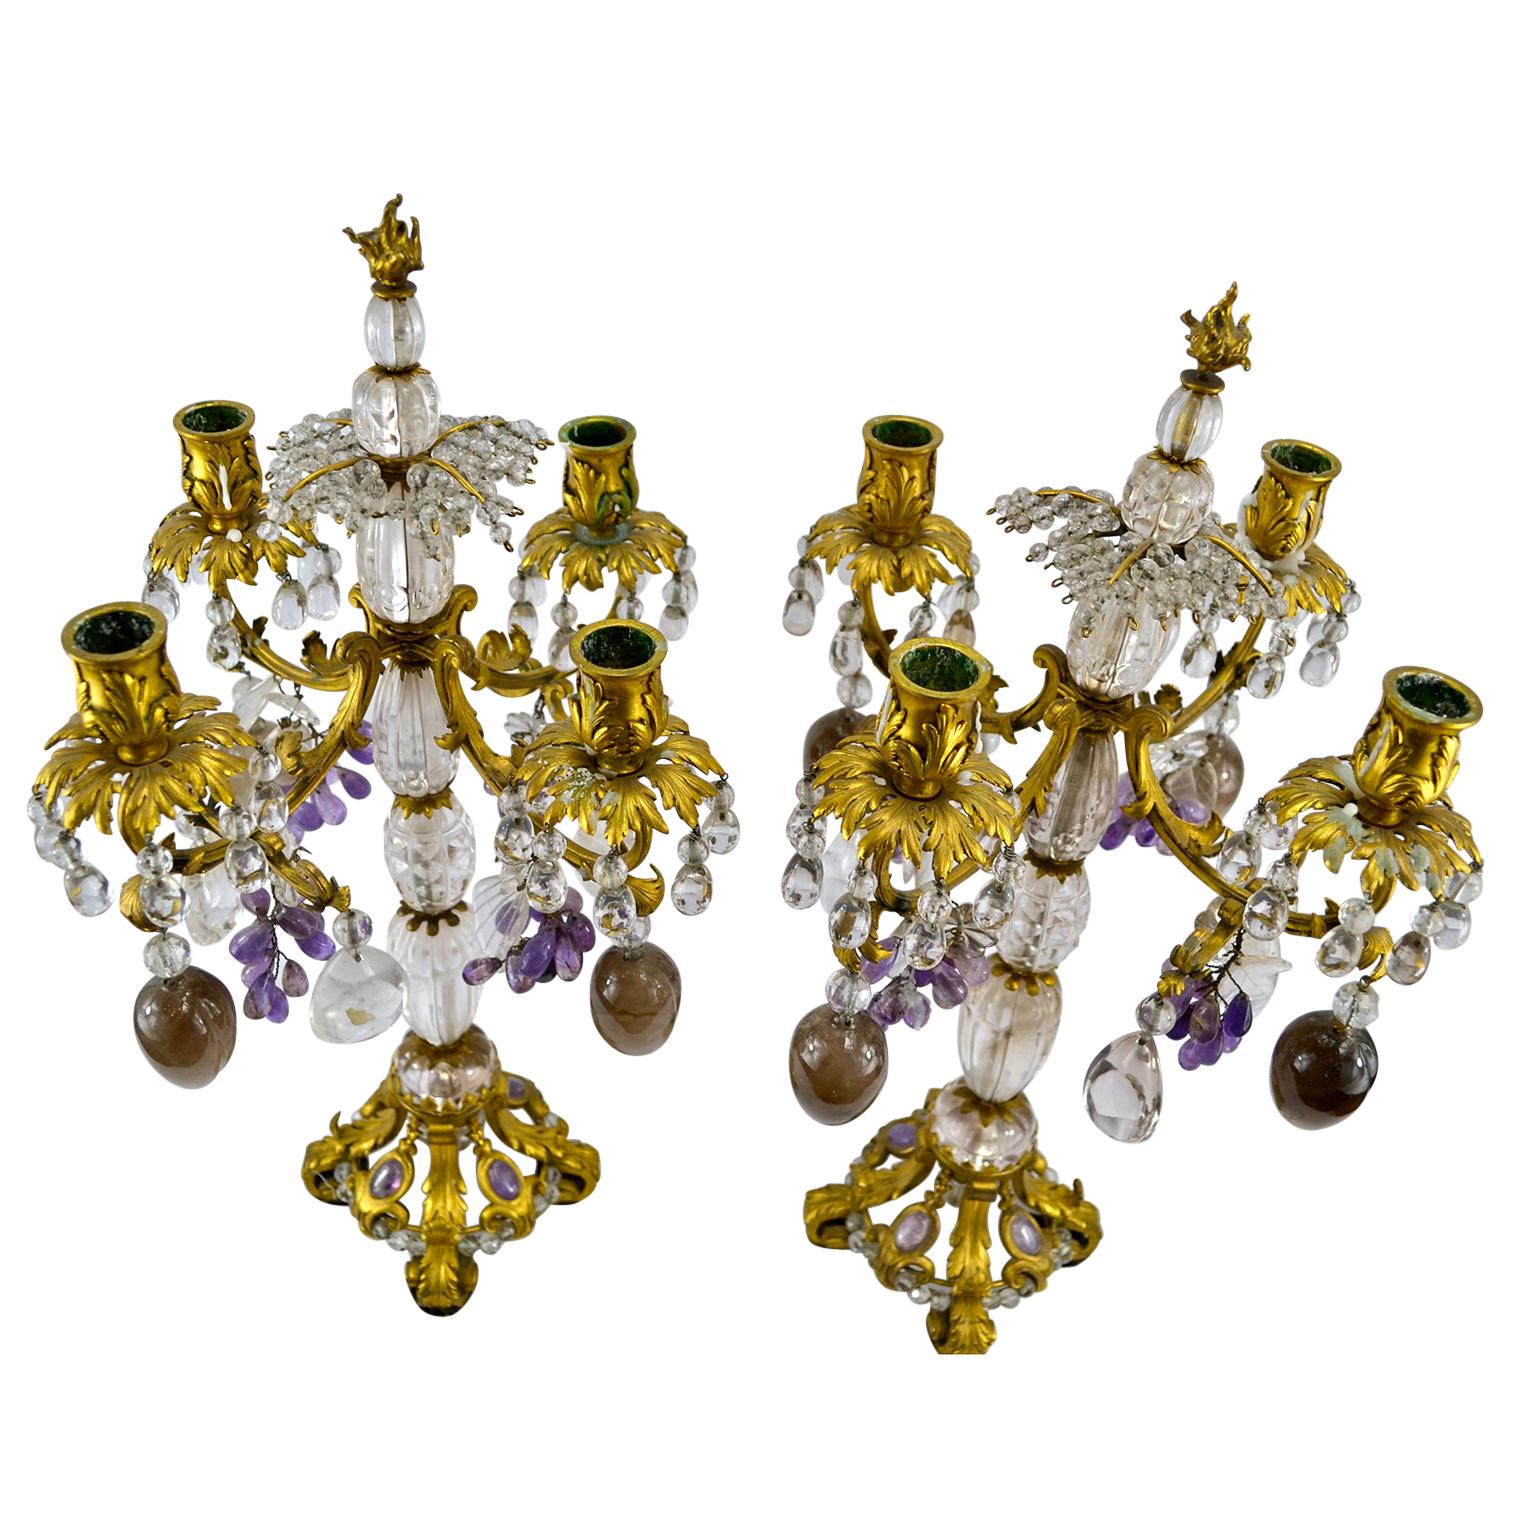 A finely chased pair of French Louis XV style gilded bronze, rock crystal, amethyst and smoky quartz four arm candelabra.